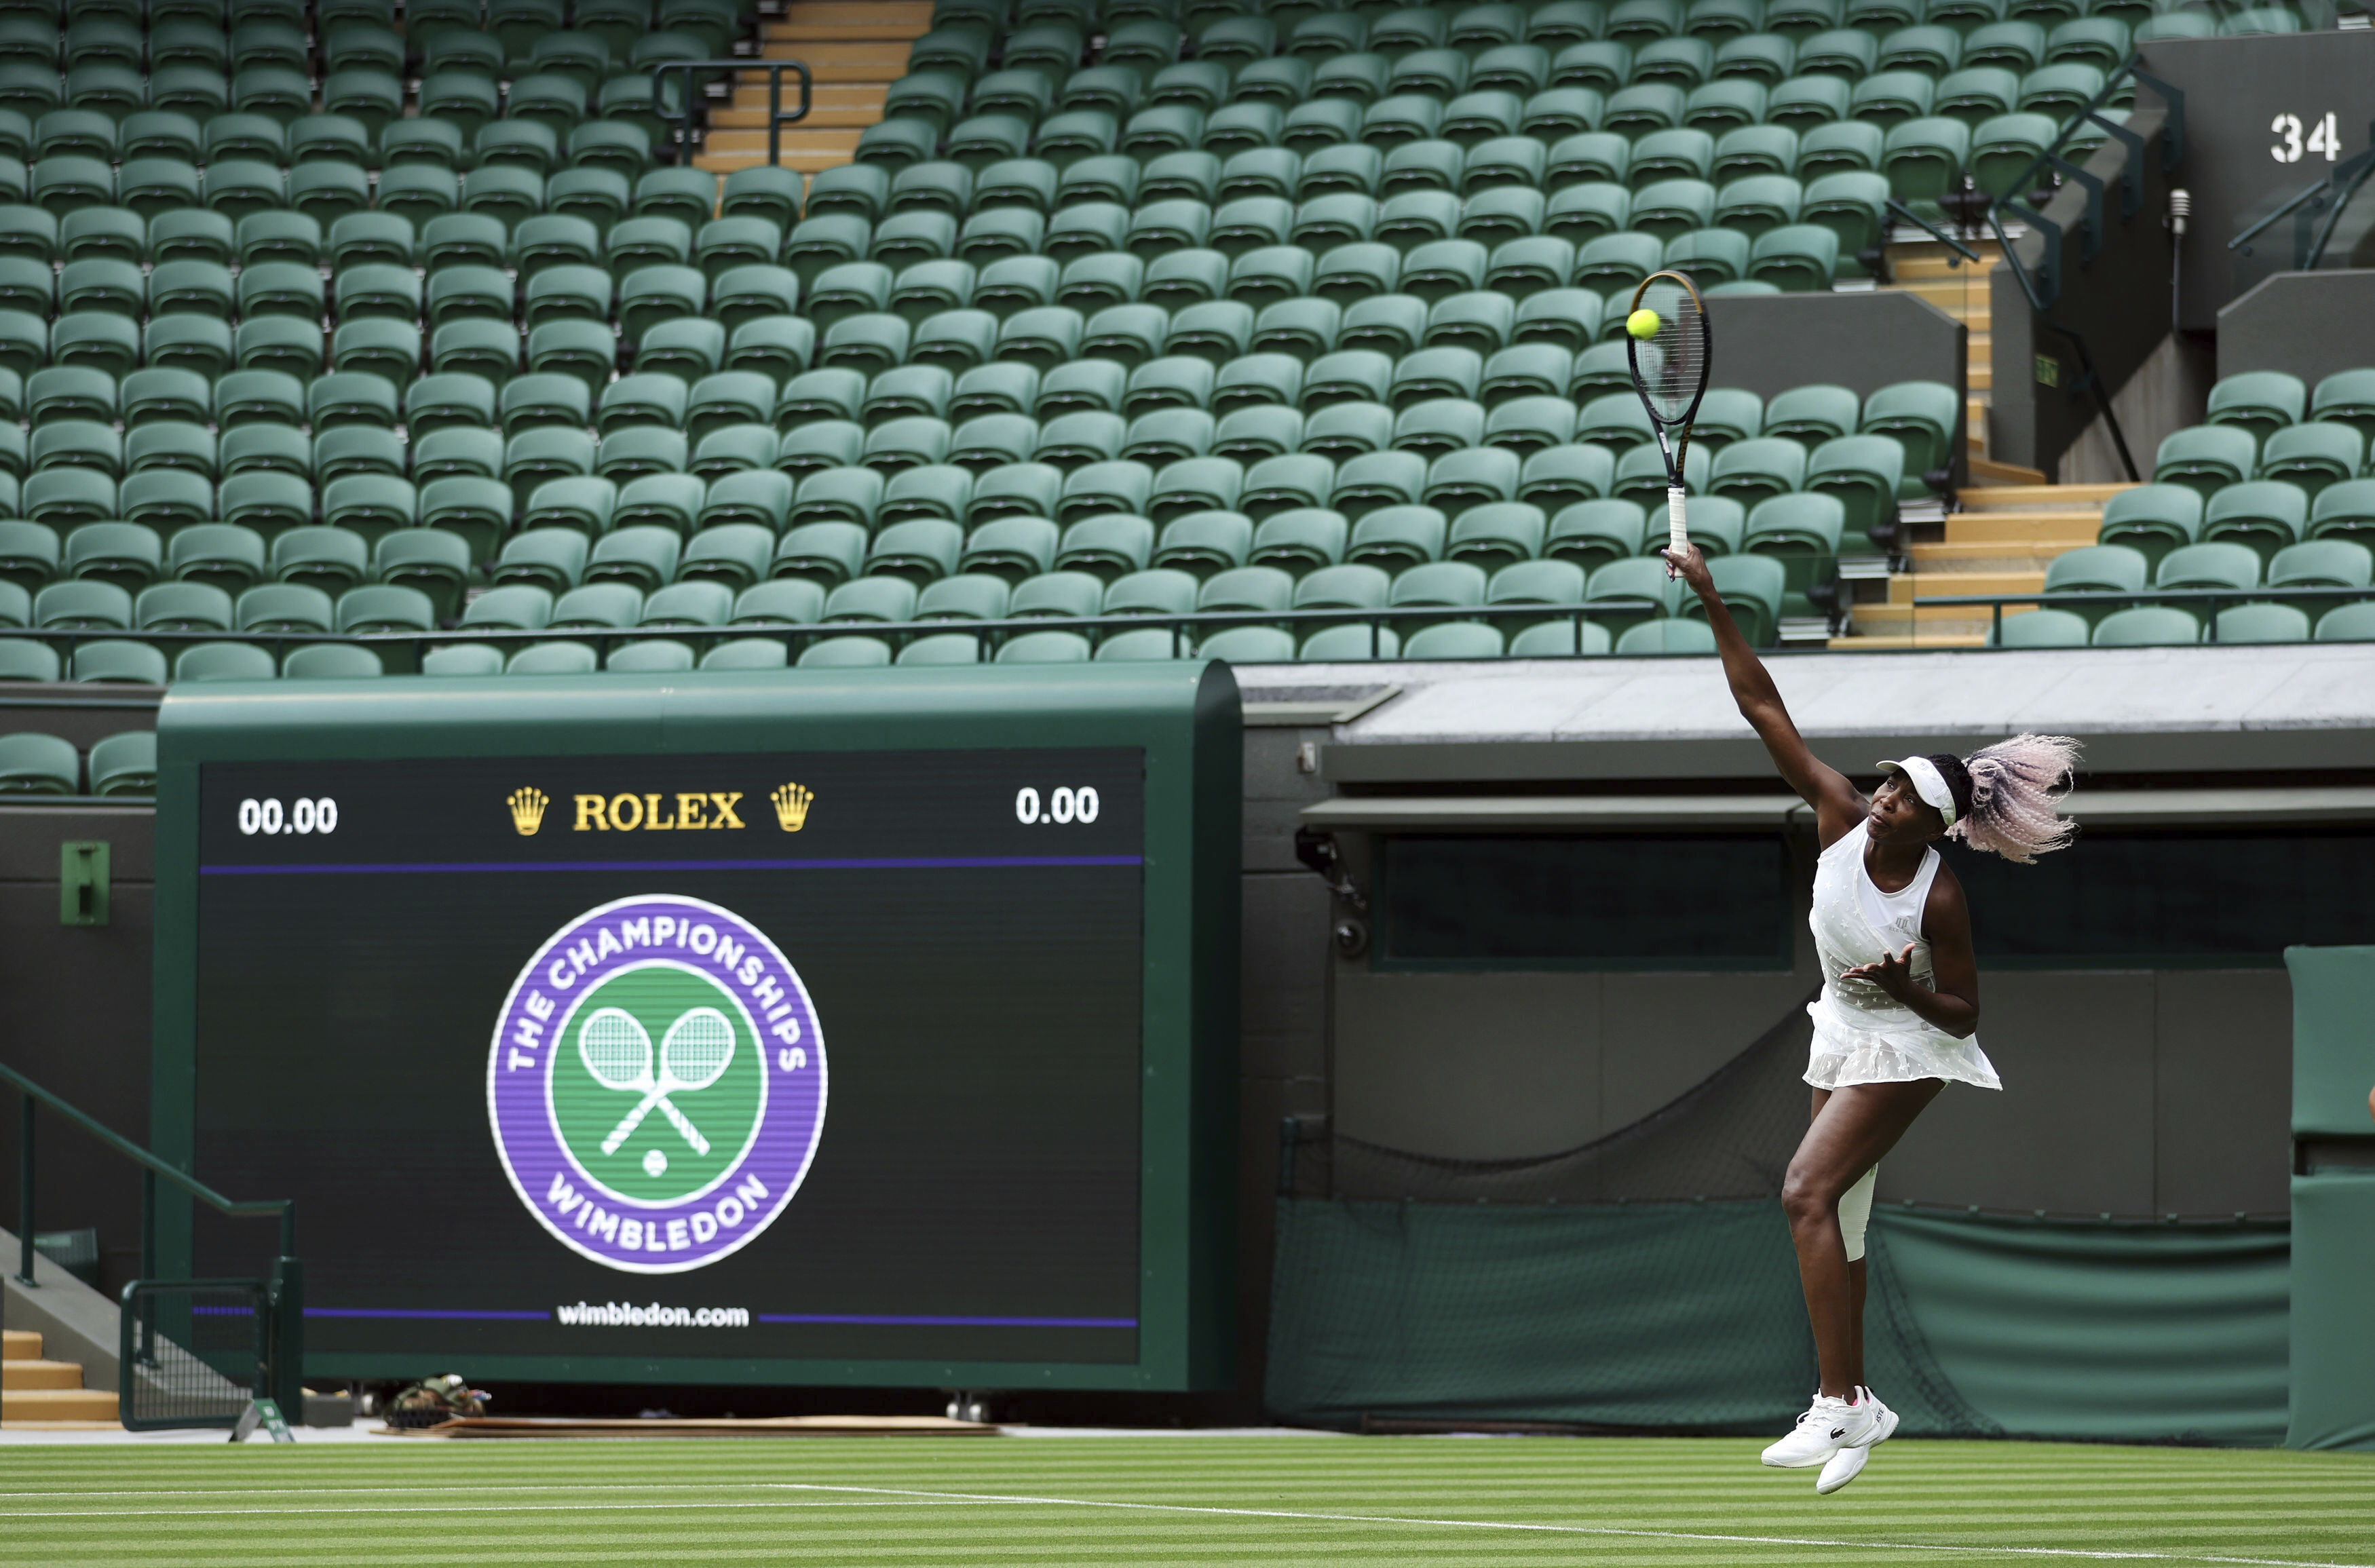 WHAT TO KNOW ABOUT THE UPCOMING WIMBLEDON 2023 - A1 Tennis